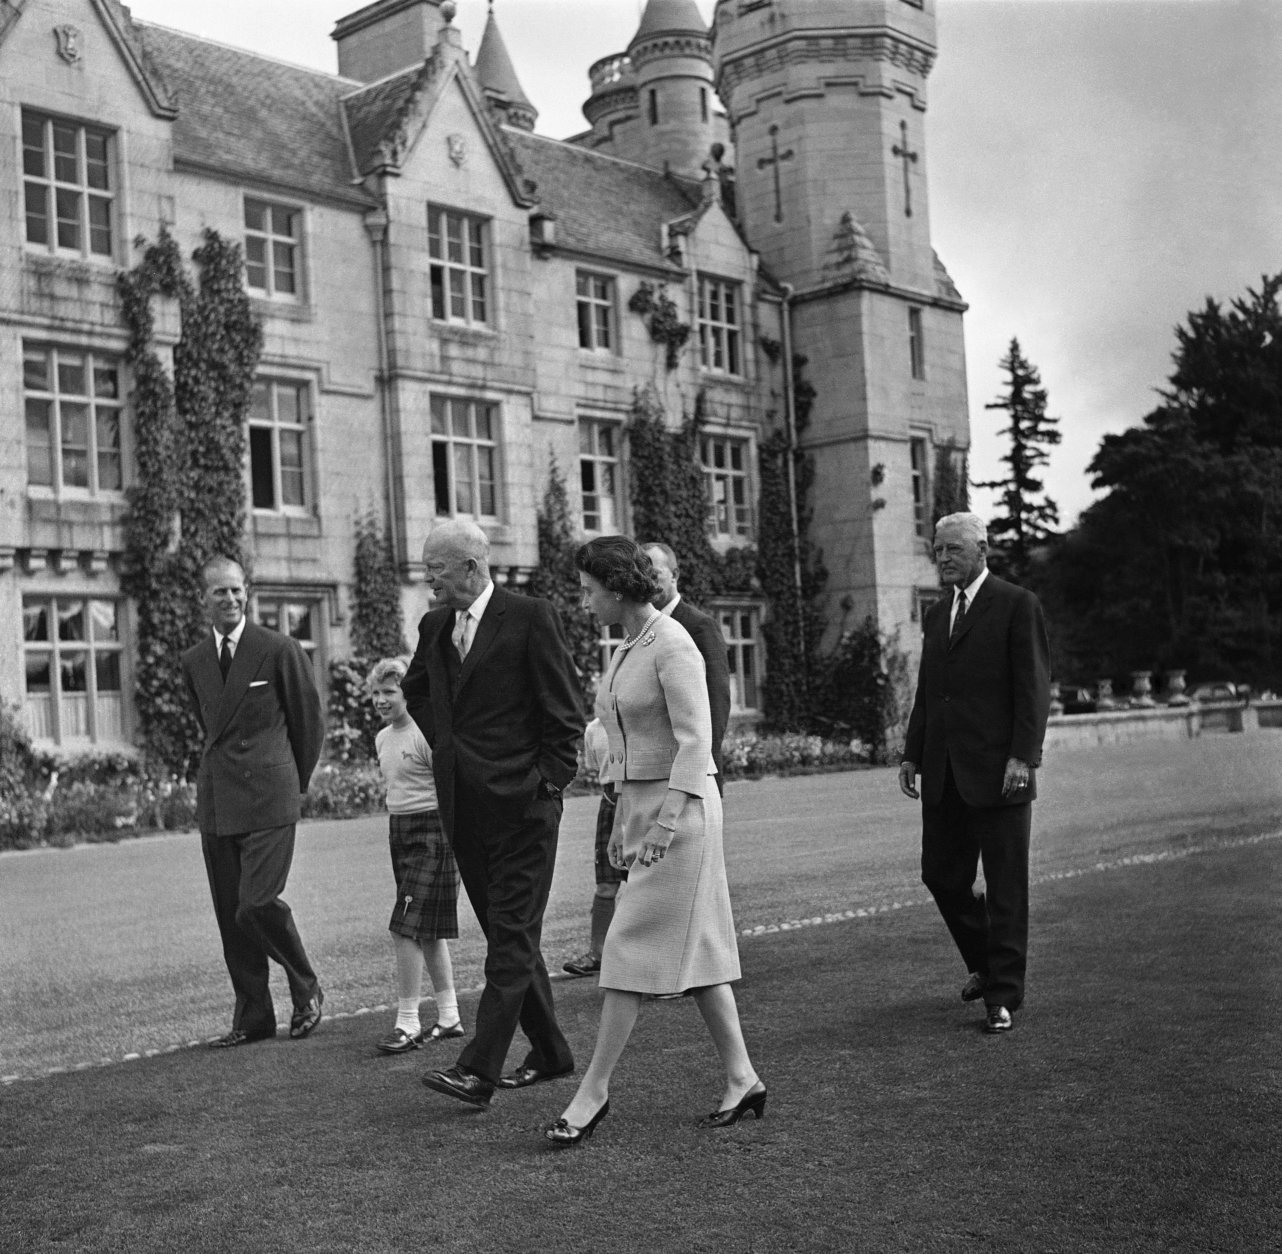 President Dwight D. Eisenhower chats with Prince Philip, Princess Anne and Queen Elizabeth II as they stroll through the grounds of Balmoral Castle in Scotland, Aug. 29, 1959, before the president left for Chequers to meet Prime Minister MacMillan. Eisenhower was an overnight guest at the castle. (AP Photo)